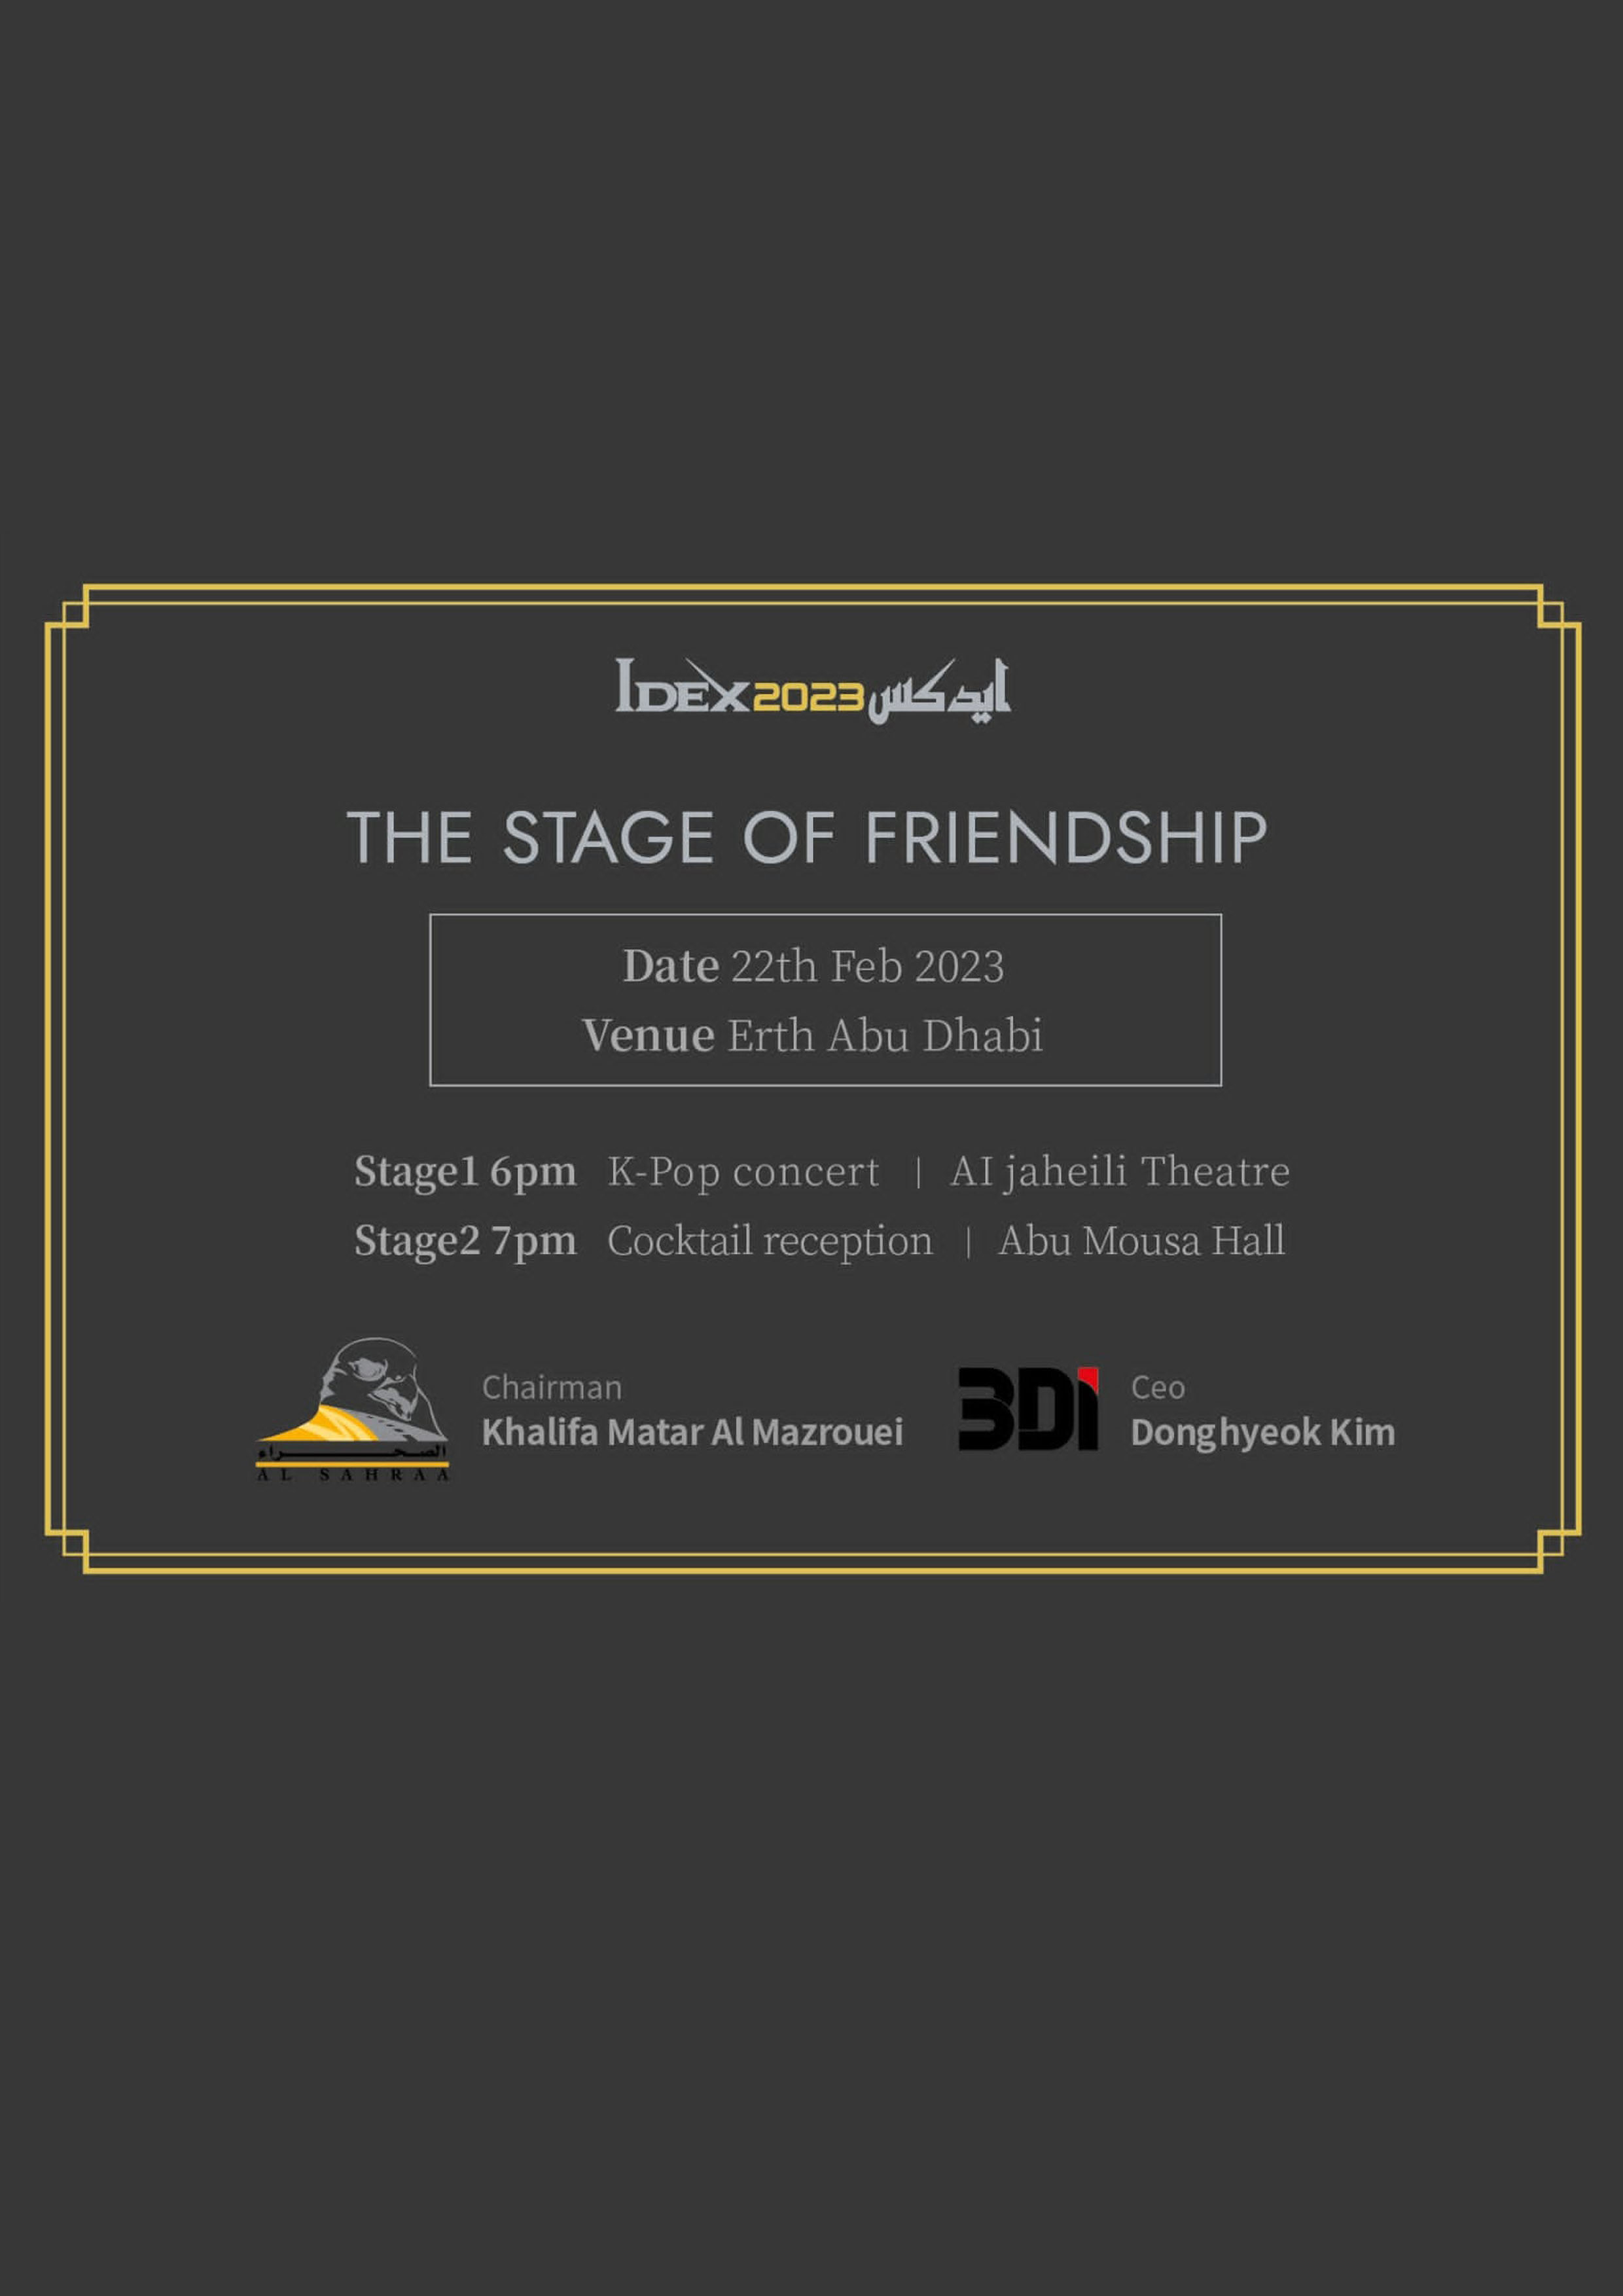 The stage of friendship